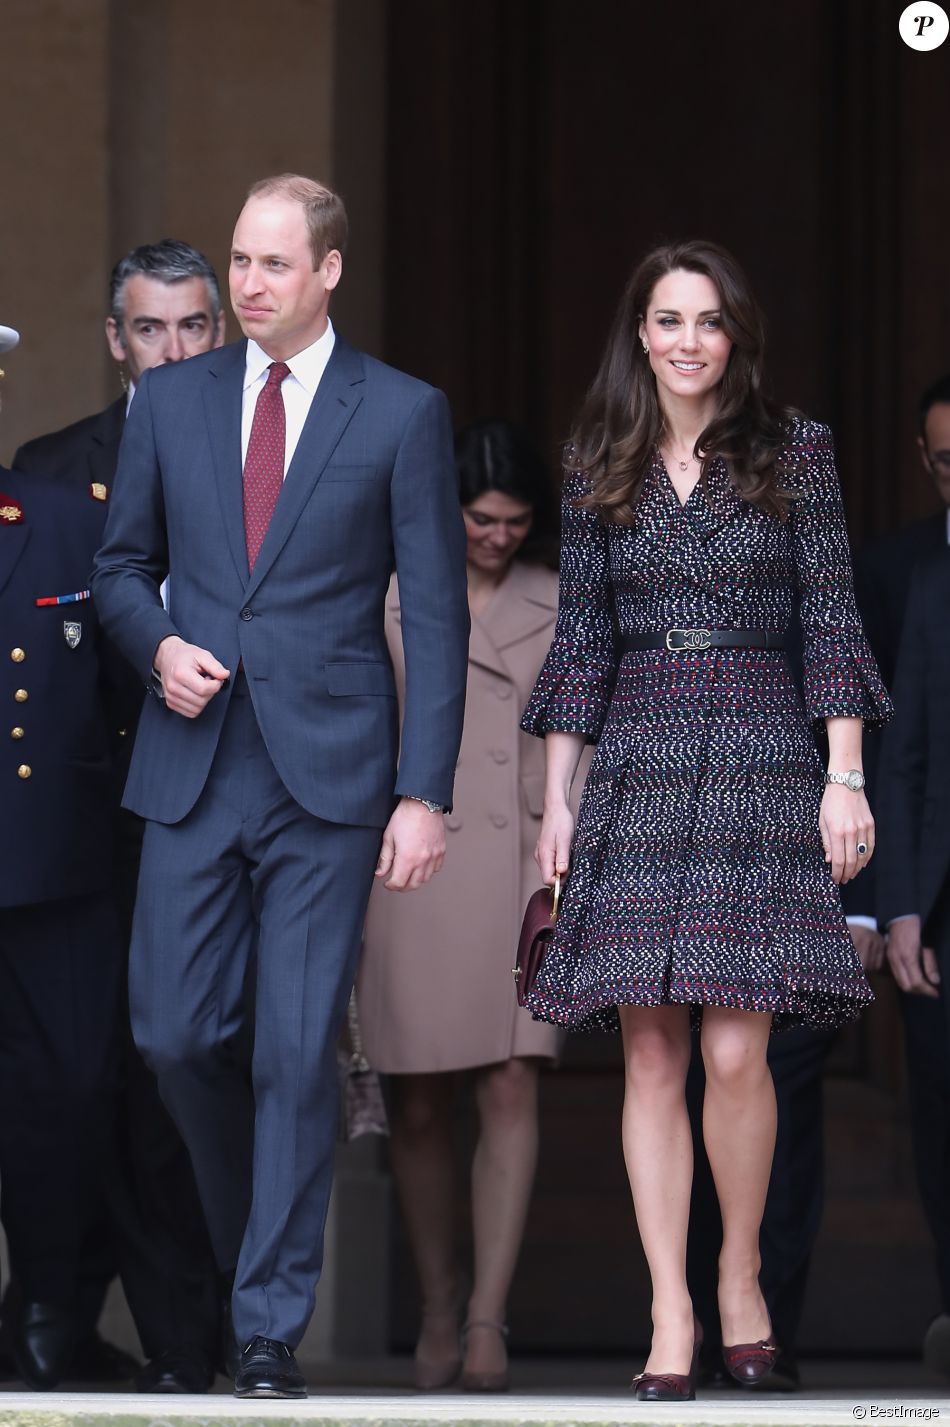 CASA REAL BRITÁNICA 3144469-le-prince-william-et-kate-middleton-visi-950x0-1